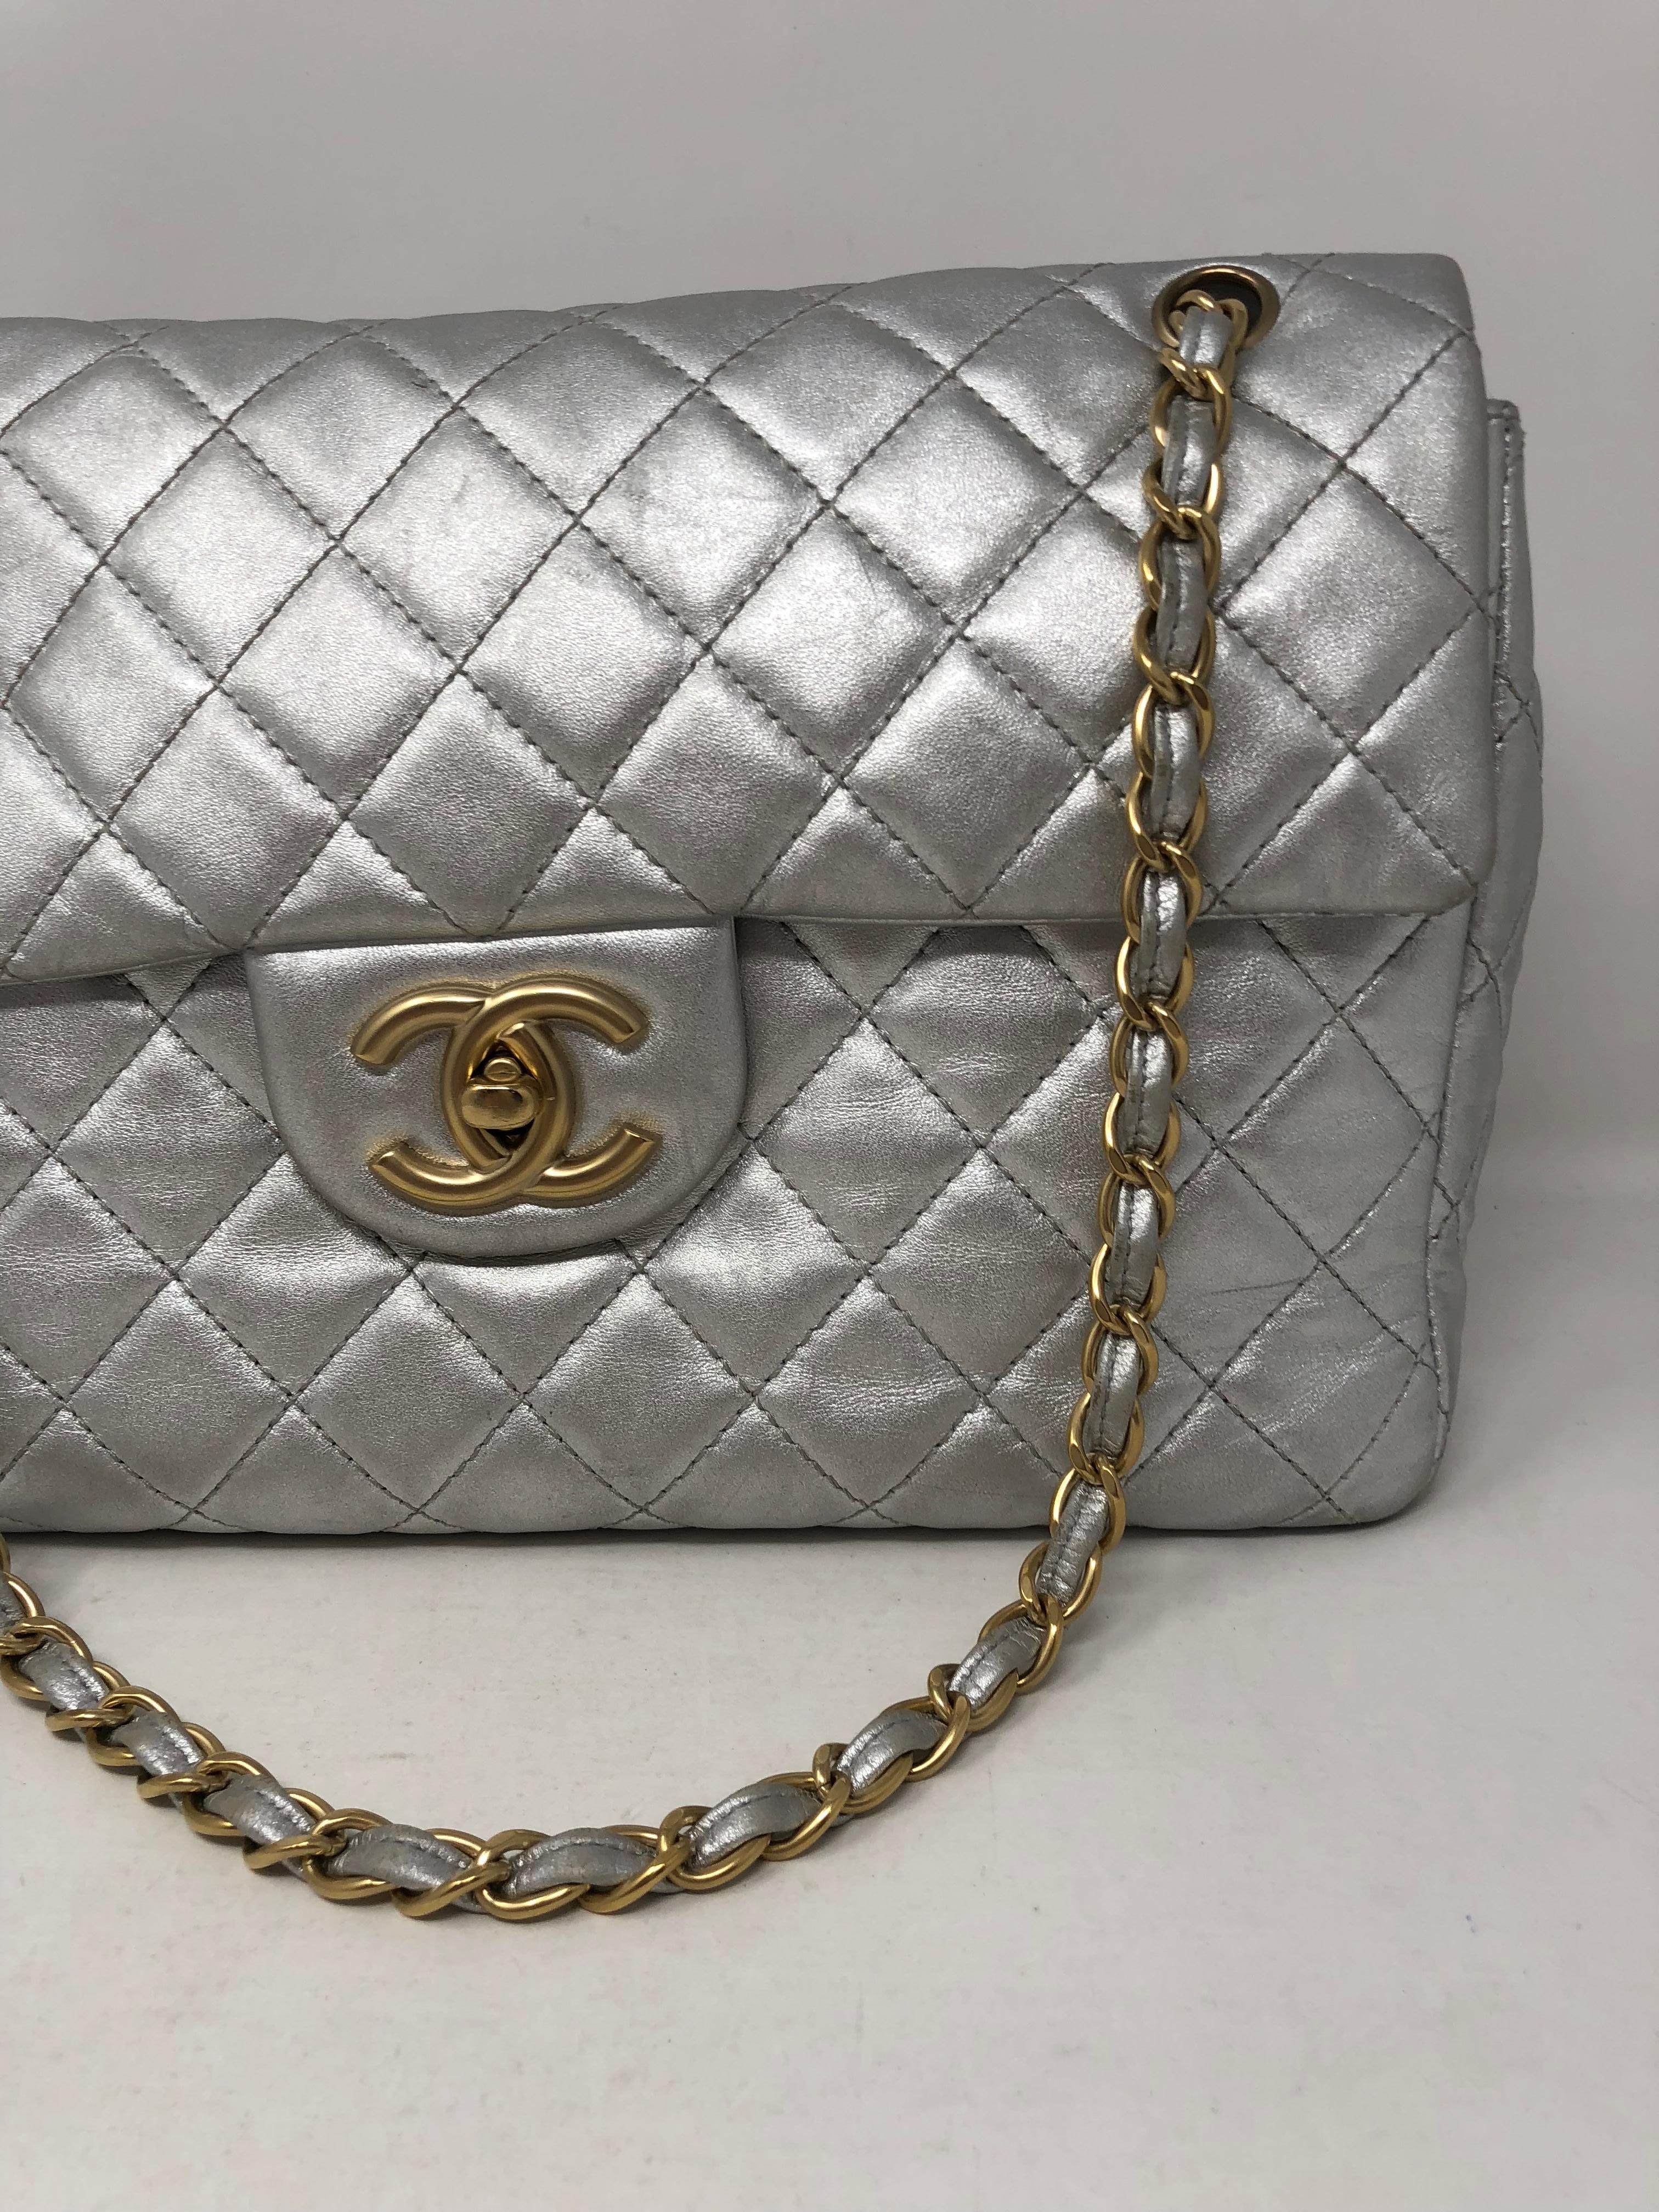 Chanel Silver Metallic Jumbo Bag. Gold hardware. Rare combo and hard to find silver leather bag. Celebrity owned and worn for many photo shoots. Does have wear but lots of life left. Please check all the pictures. Guaranteed authentic. 